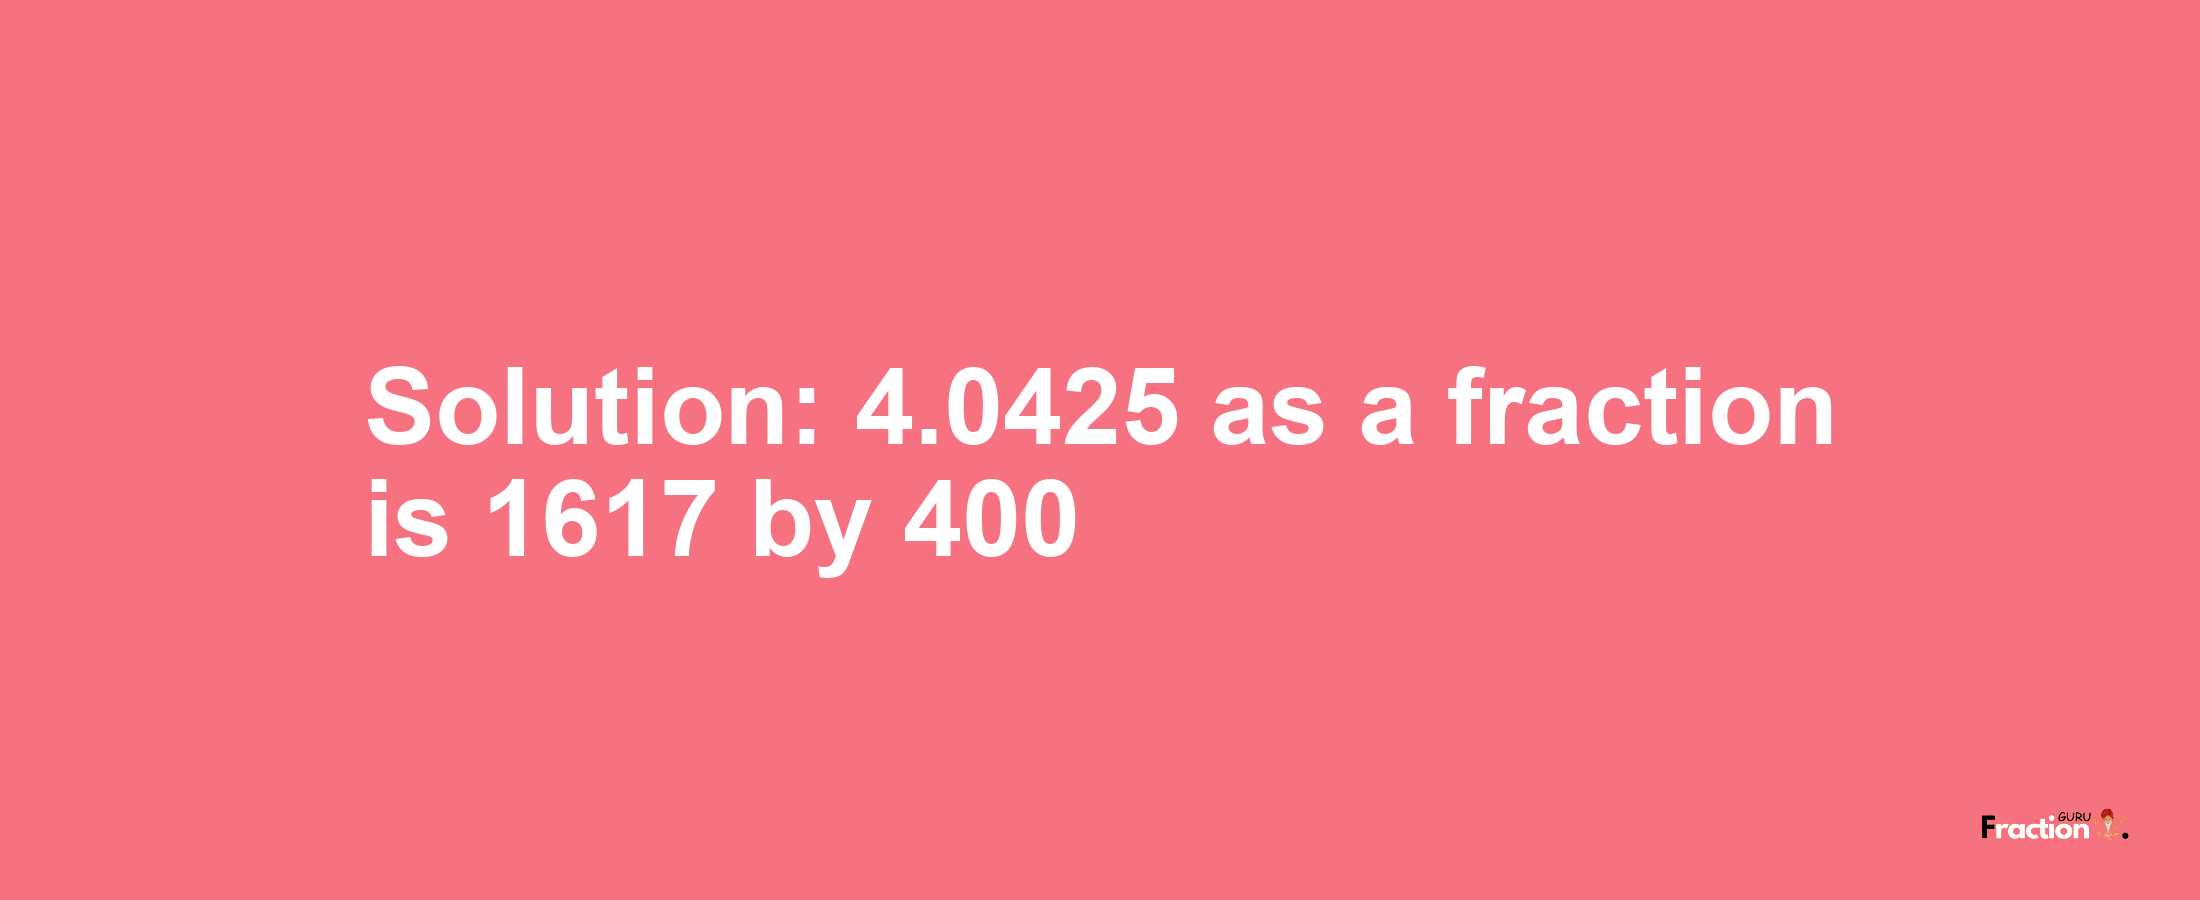 Solution:4.0425 as a fraction is 1617/400